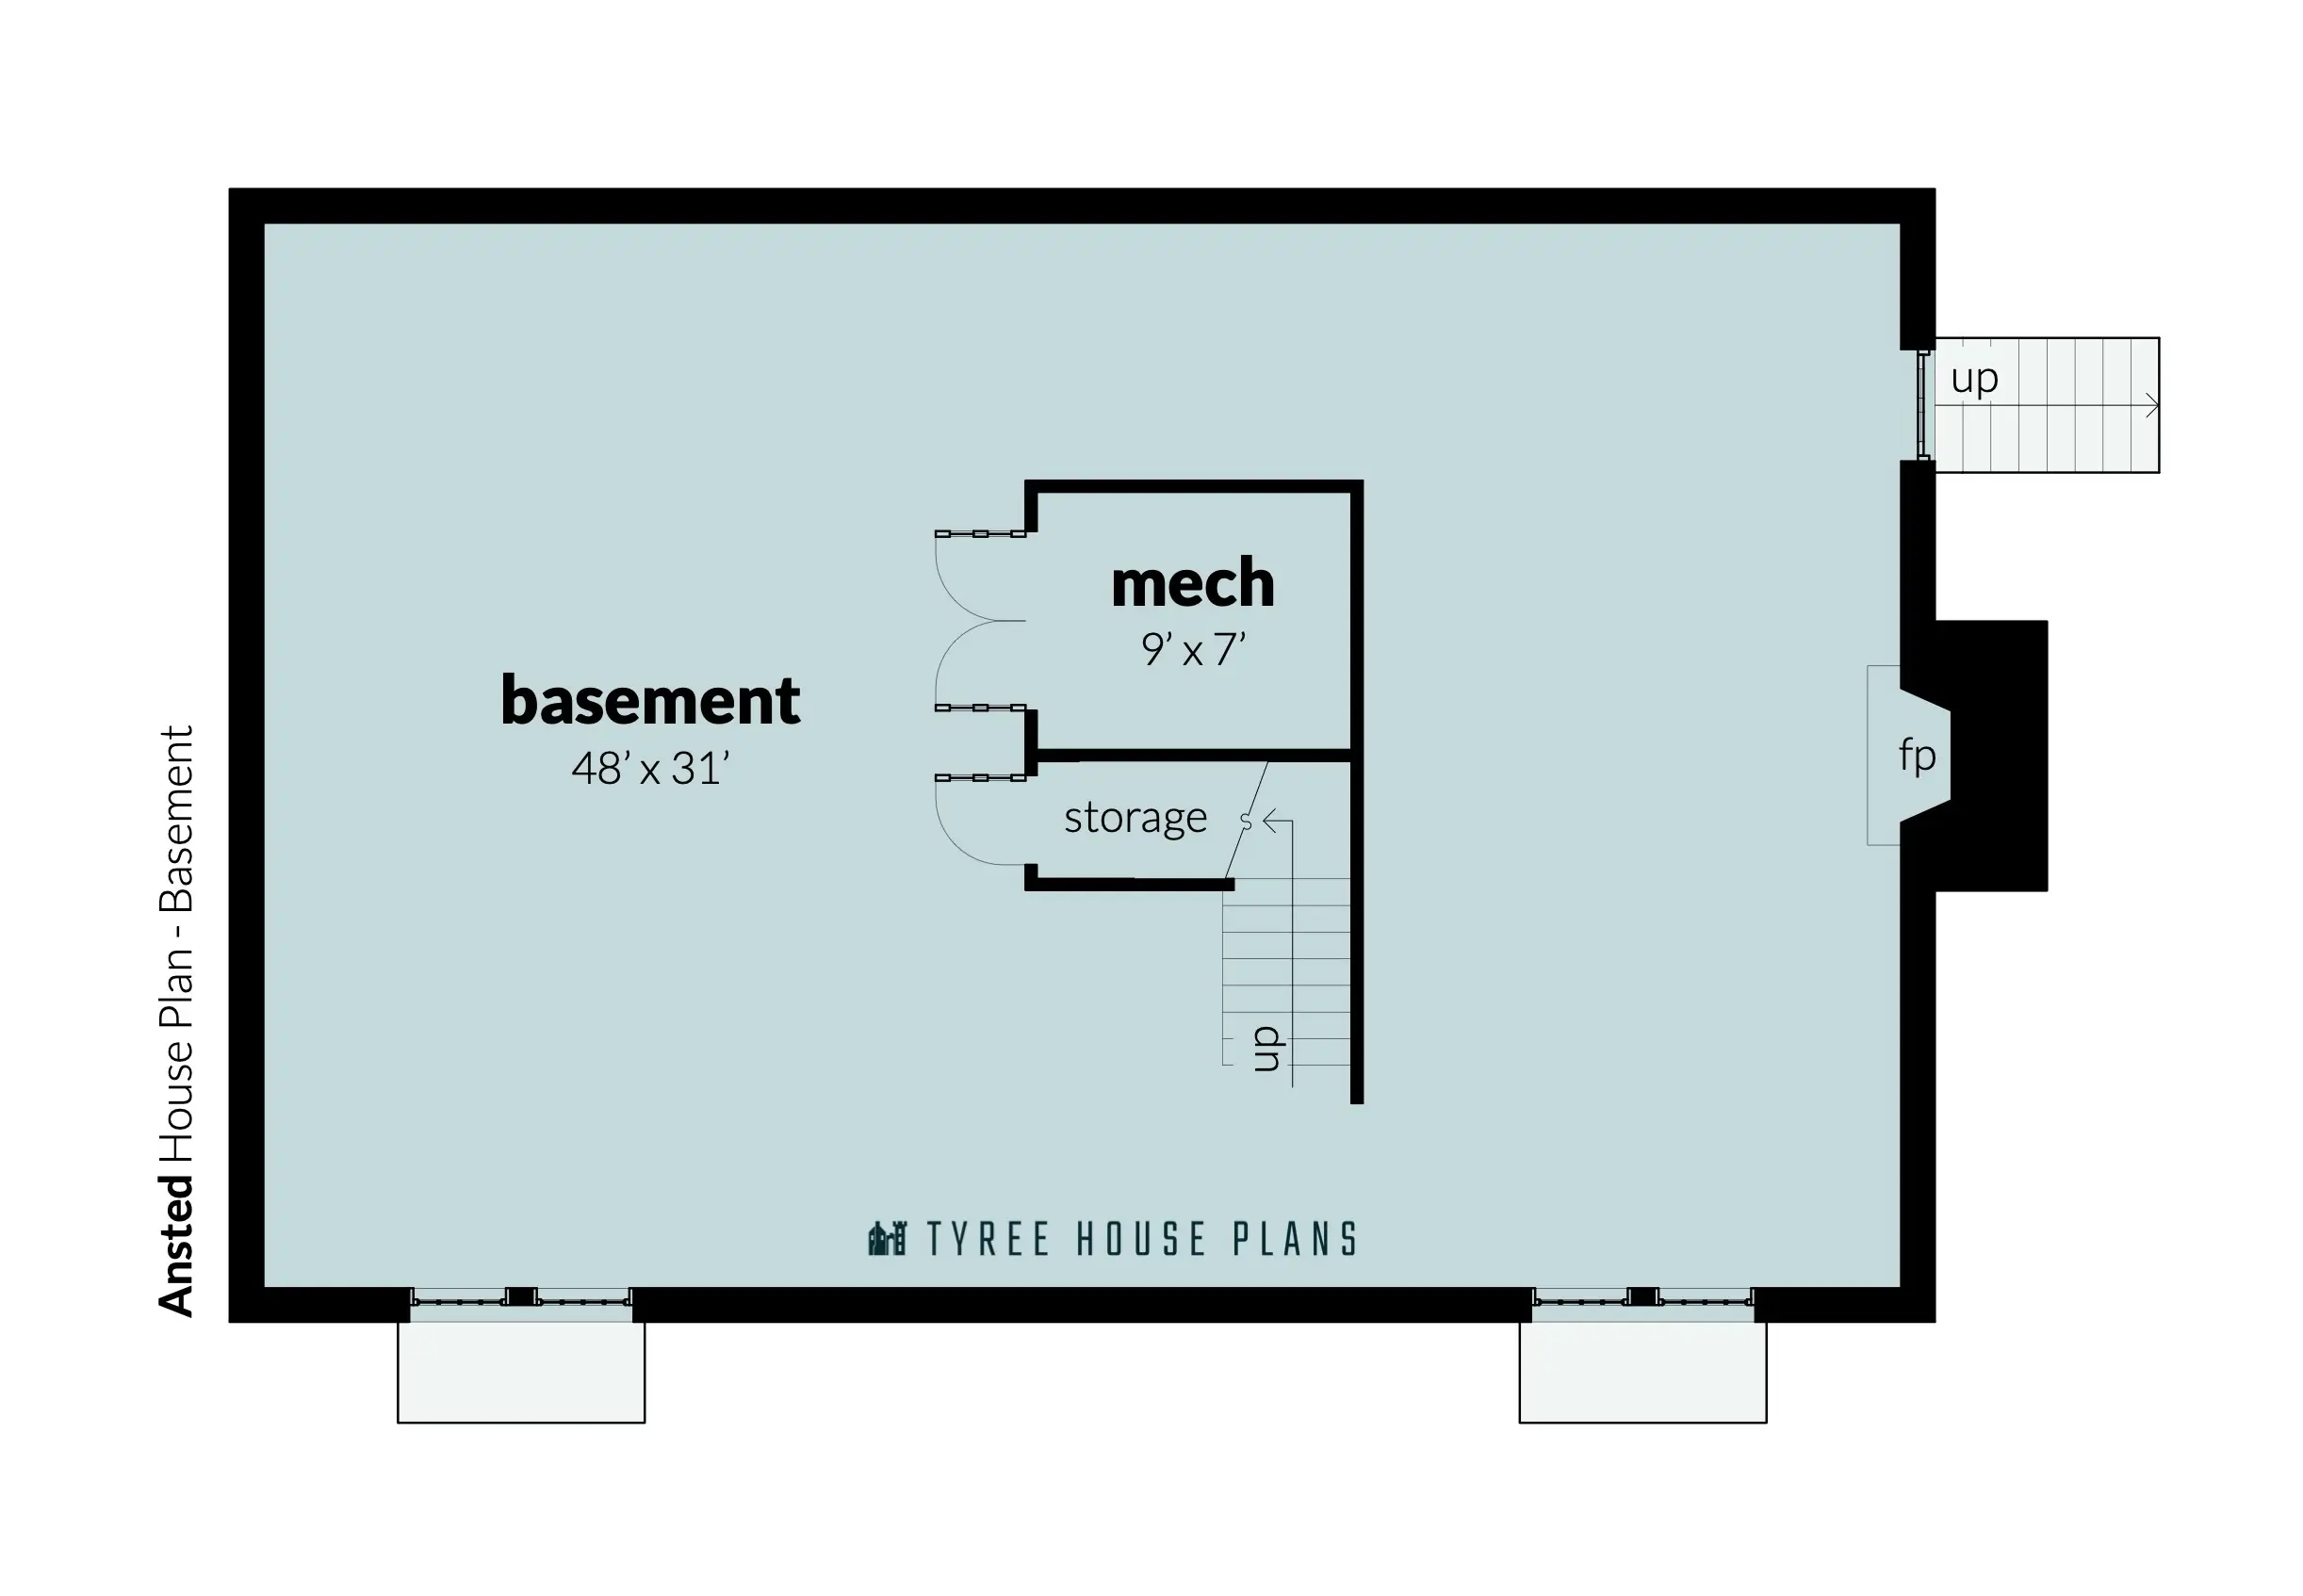 Basement. Ansted by Tyree House Plans.